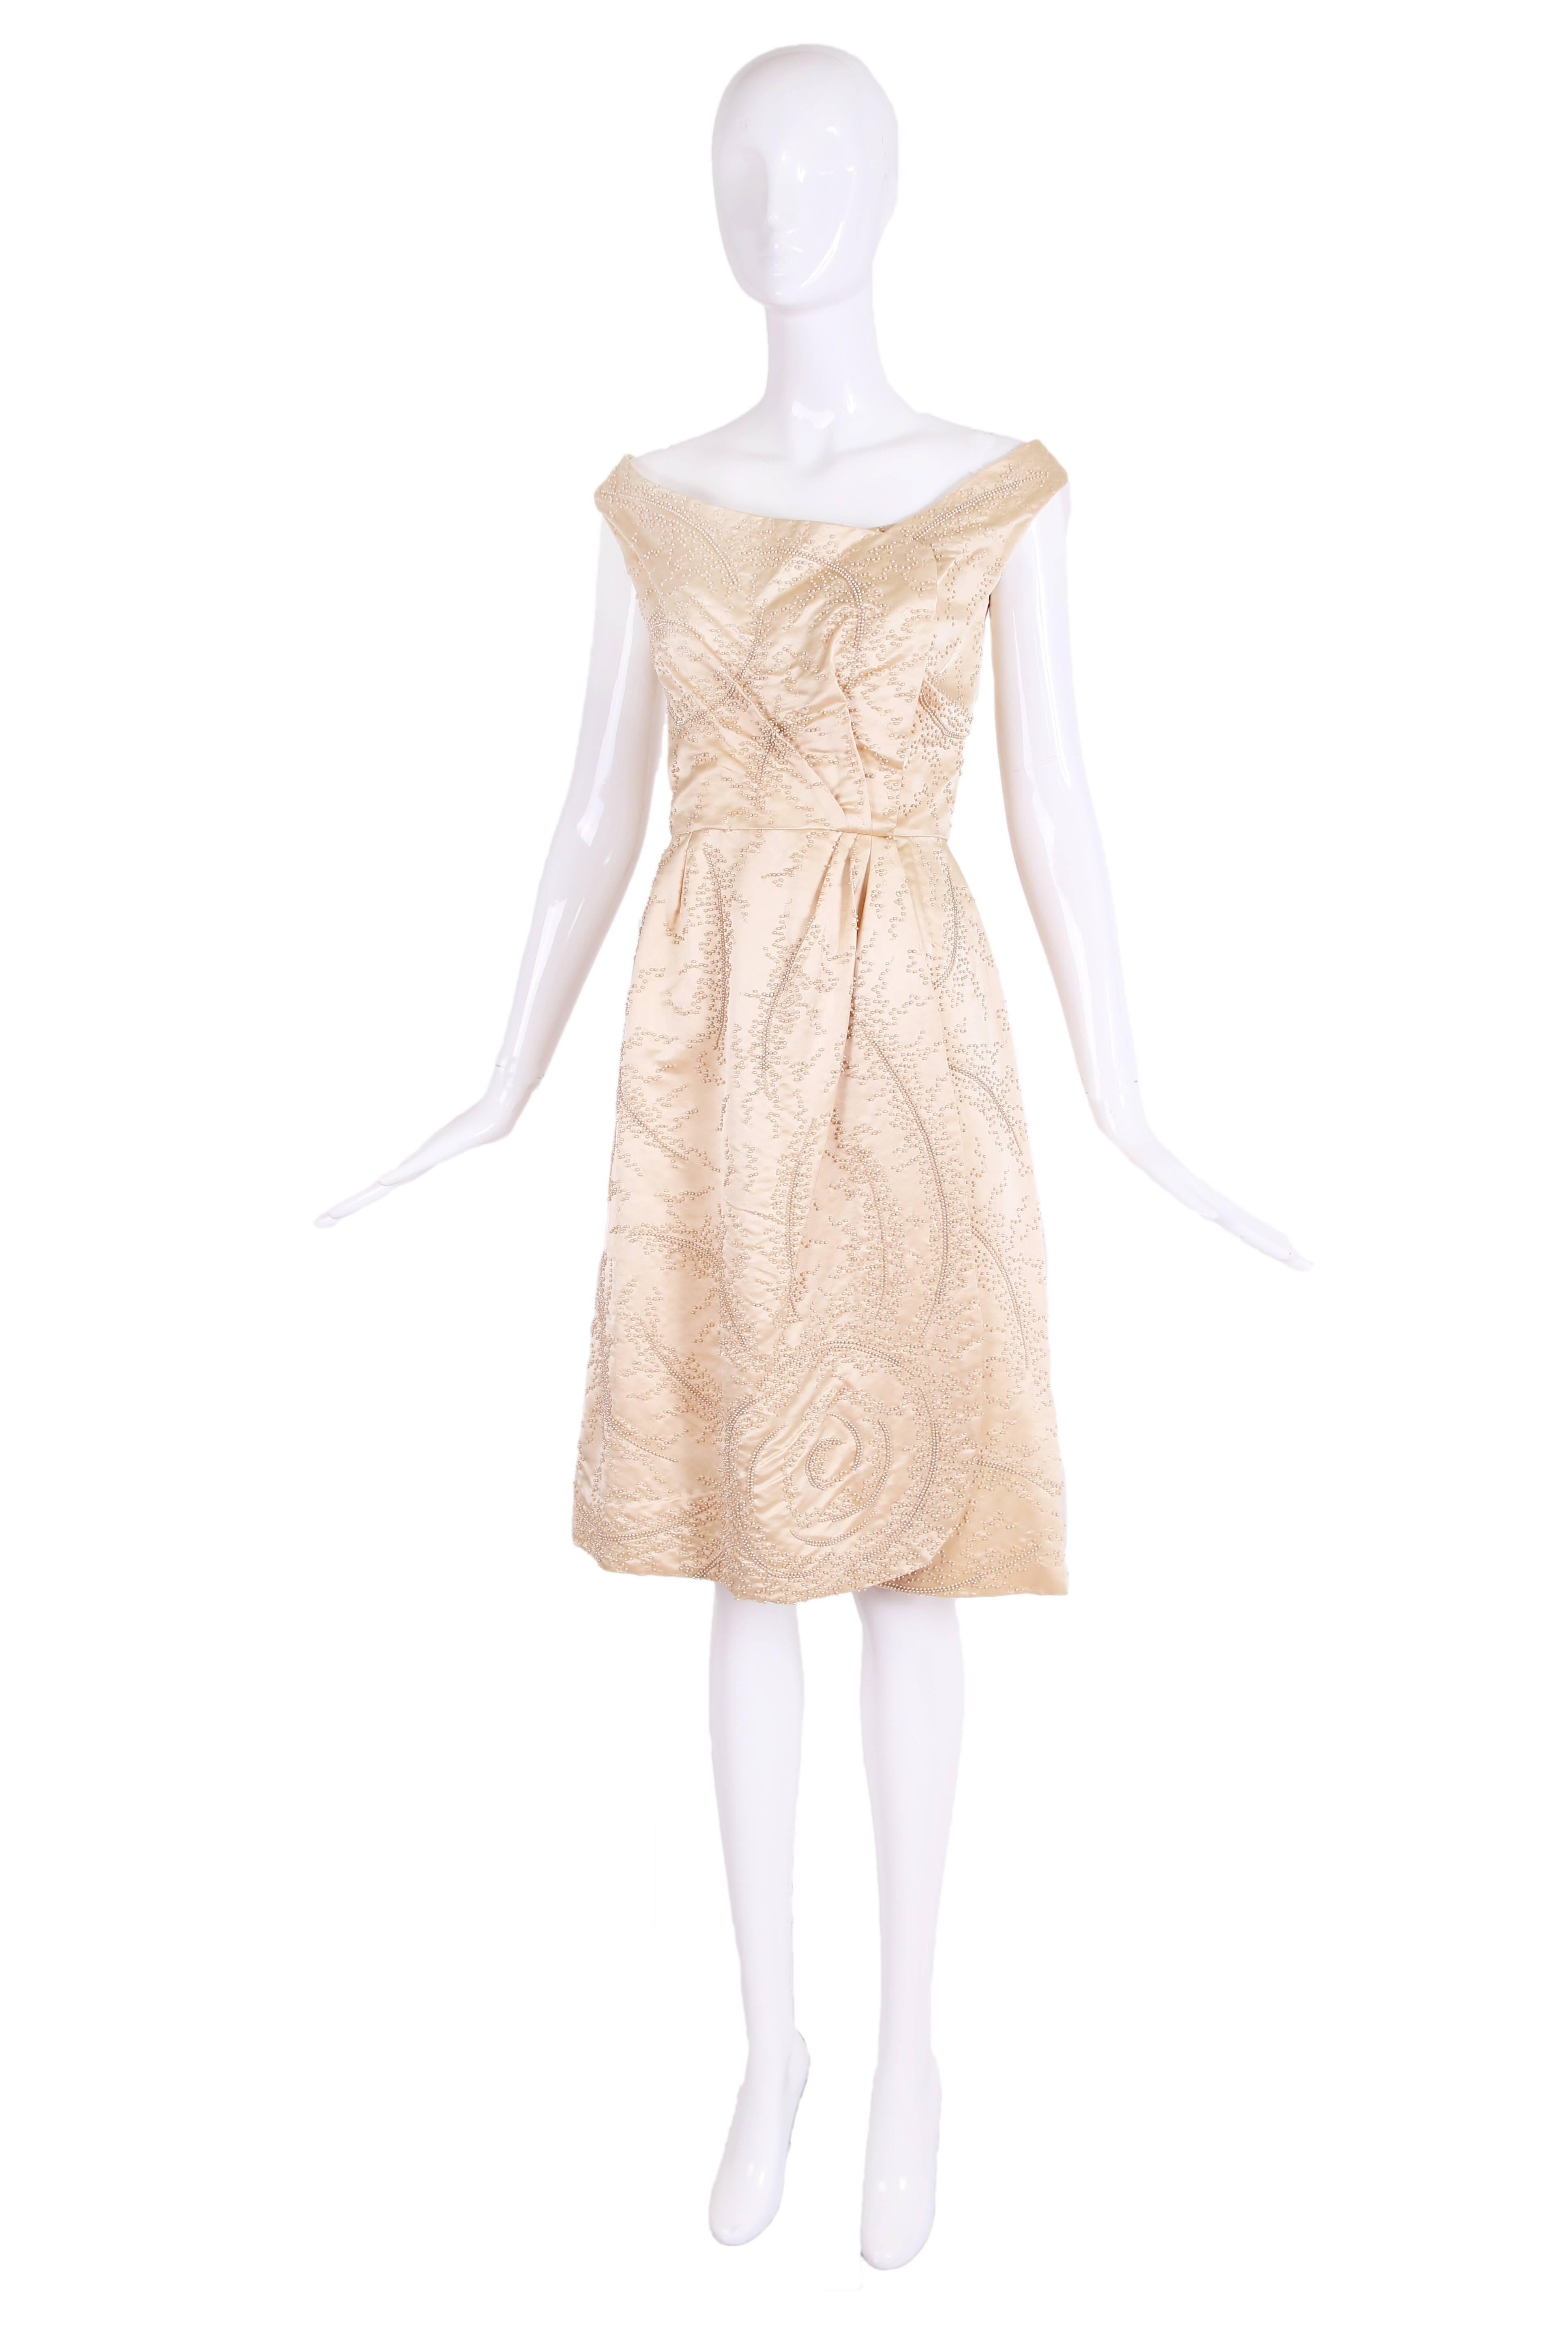 Ca. 1965 Ceil Chapman champagne-colored satin faux pearl beaded cocktail dress. Dress features an A-line silhouette with a mock wrap at front and zipper closure at back.  The dress itself is in excellent condition however there is scattered bead